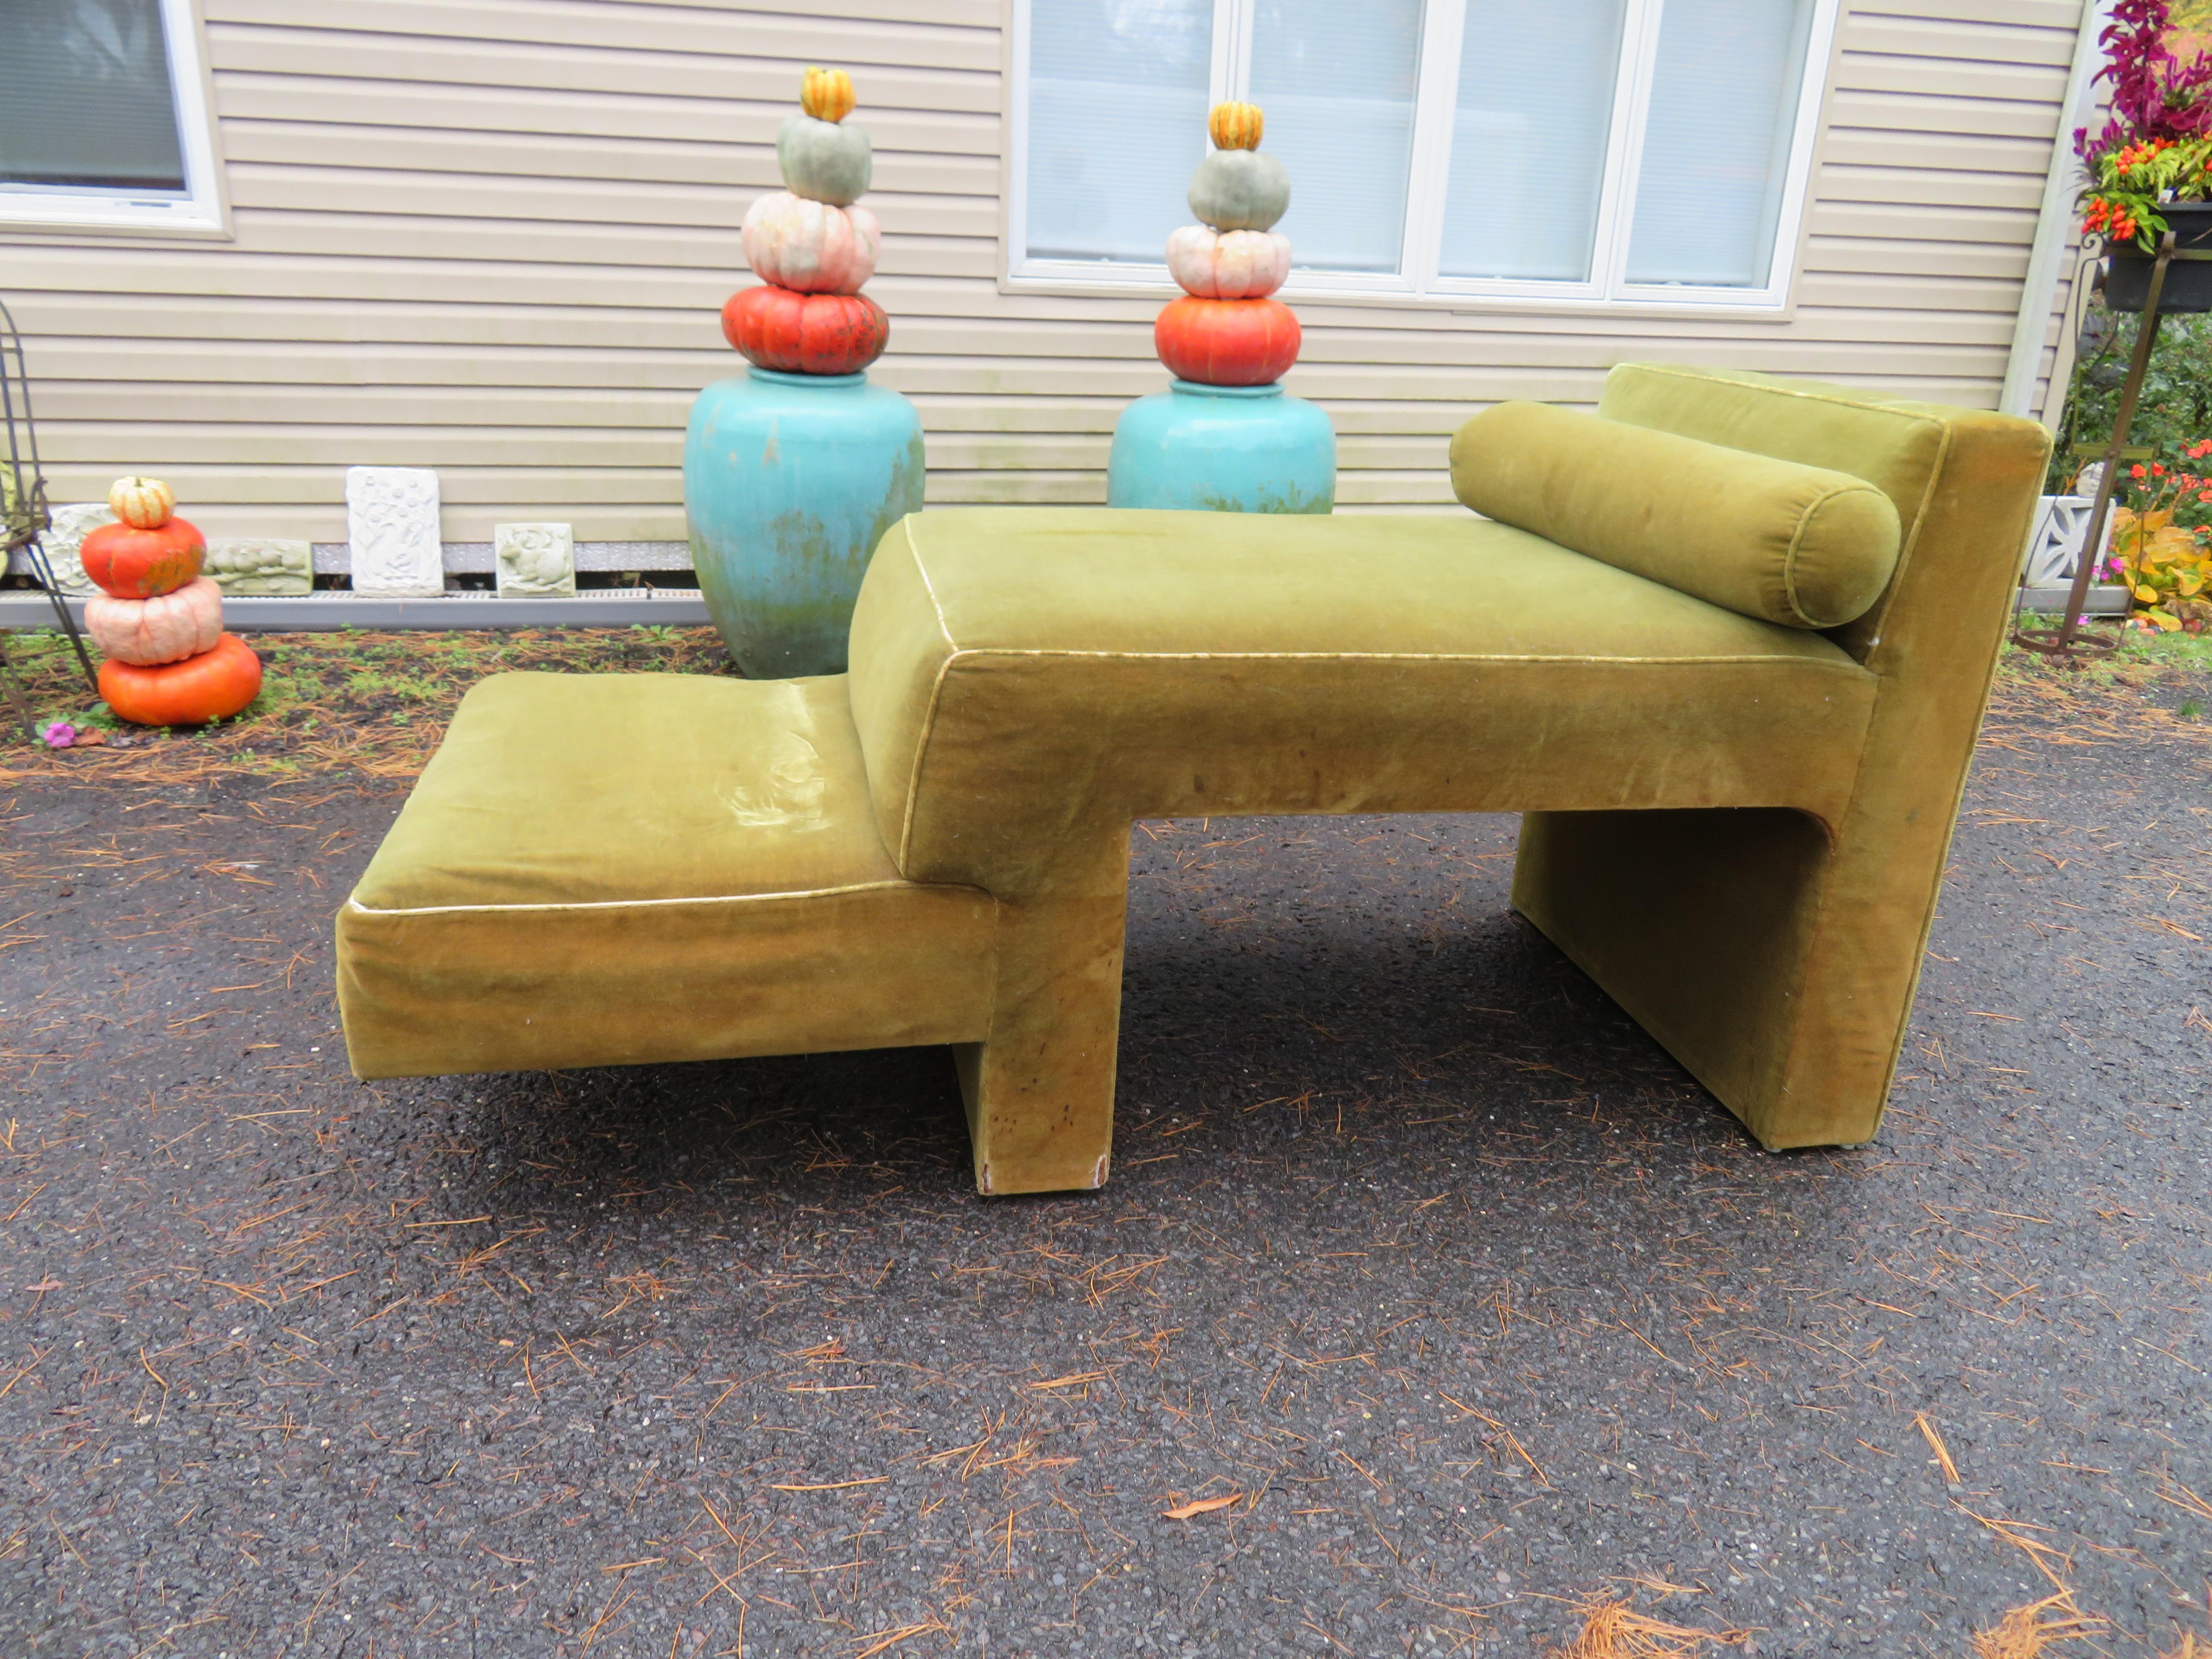 Rare Vladimir Kagan Omnibus 2-tier chaise lounge sofa. These pieces rarely come to market and would complement any existing Omnibus sofa sectional. We have several Kagan Omnibus sofa sectionals for sale on 1stdibs that this piece can be used